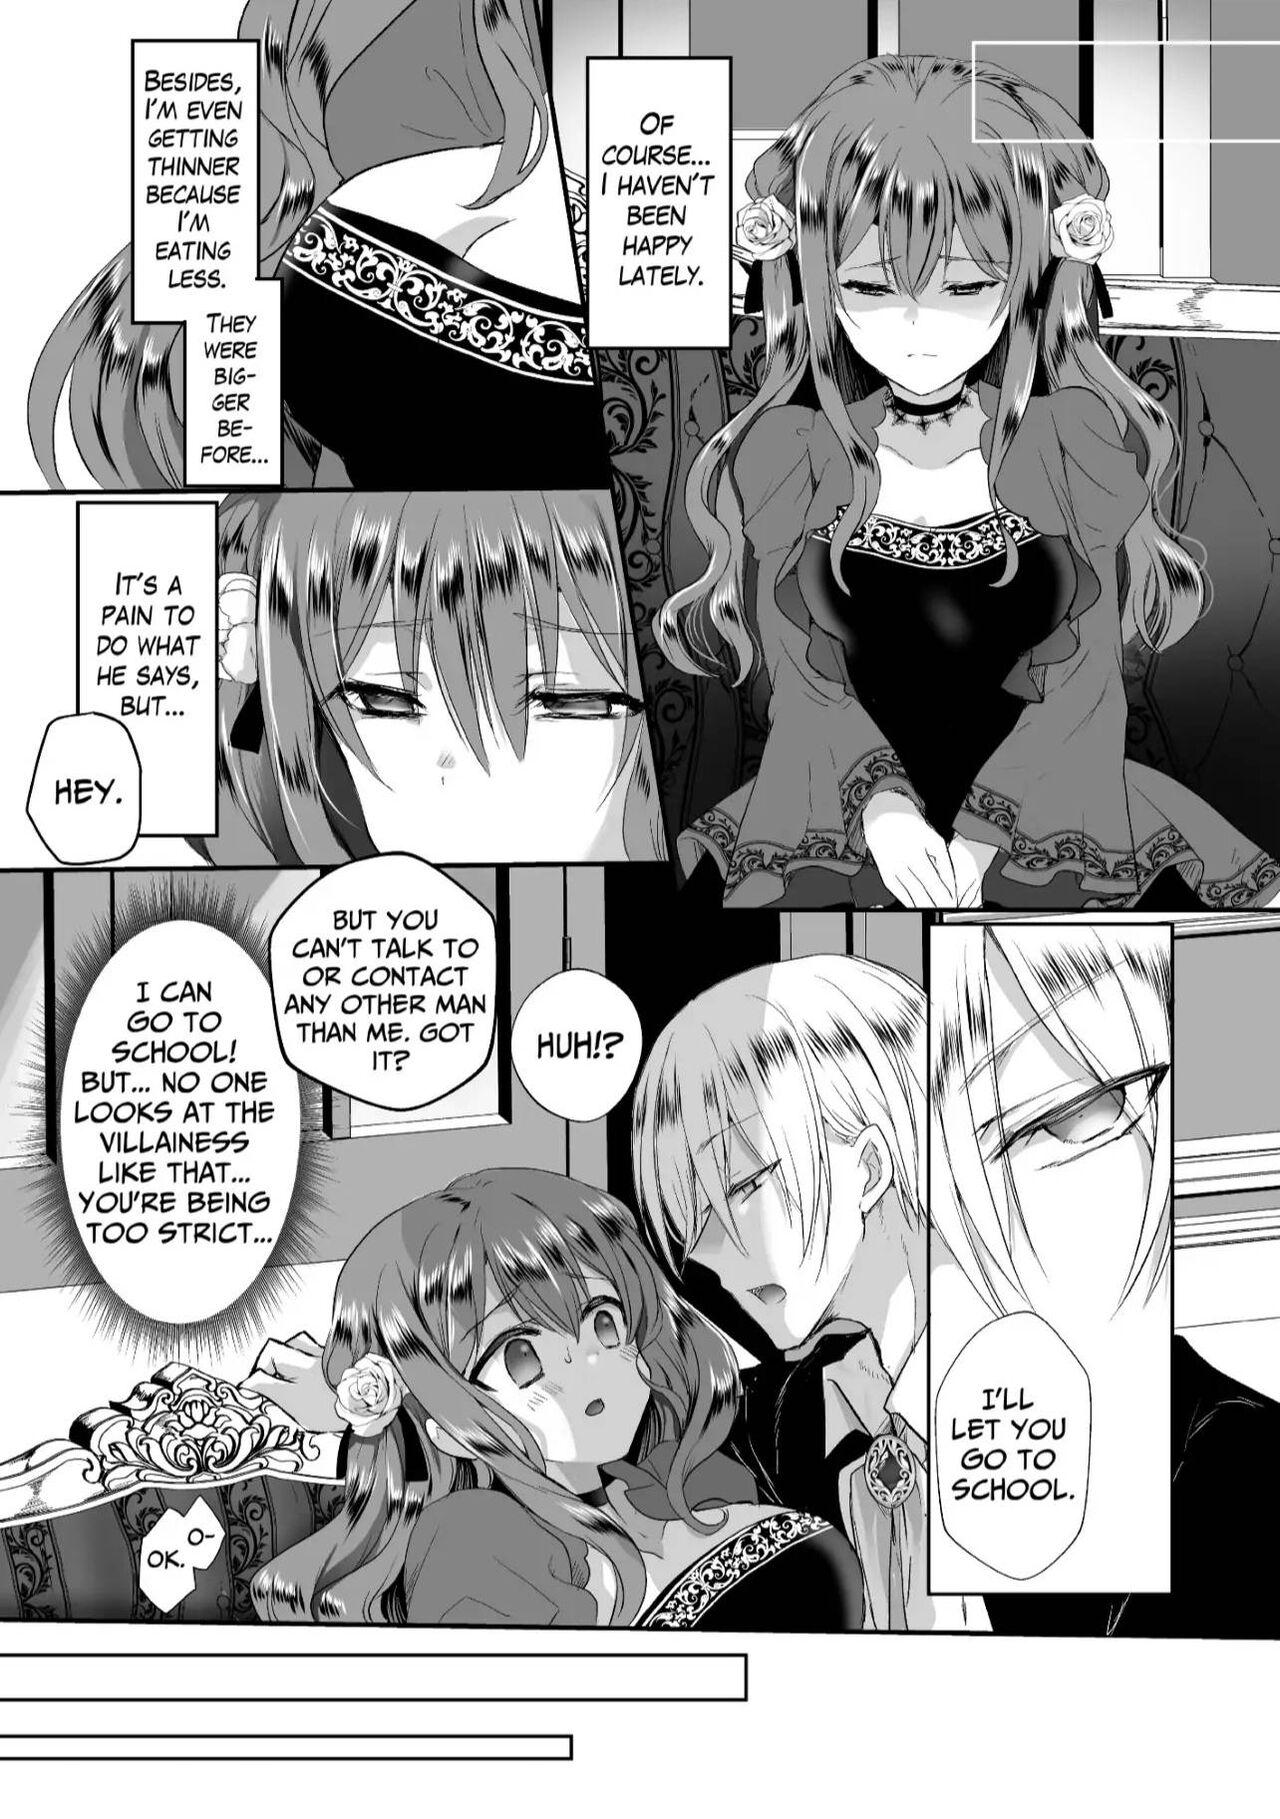 [Whisker Pad (Mofuo)] JK's Tragic Isekai Reincarnation as the Villainess ~But My Precious Side Character!~ 2 [English] [Digital] 35